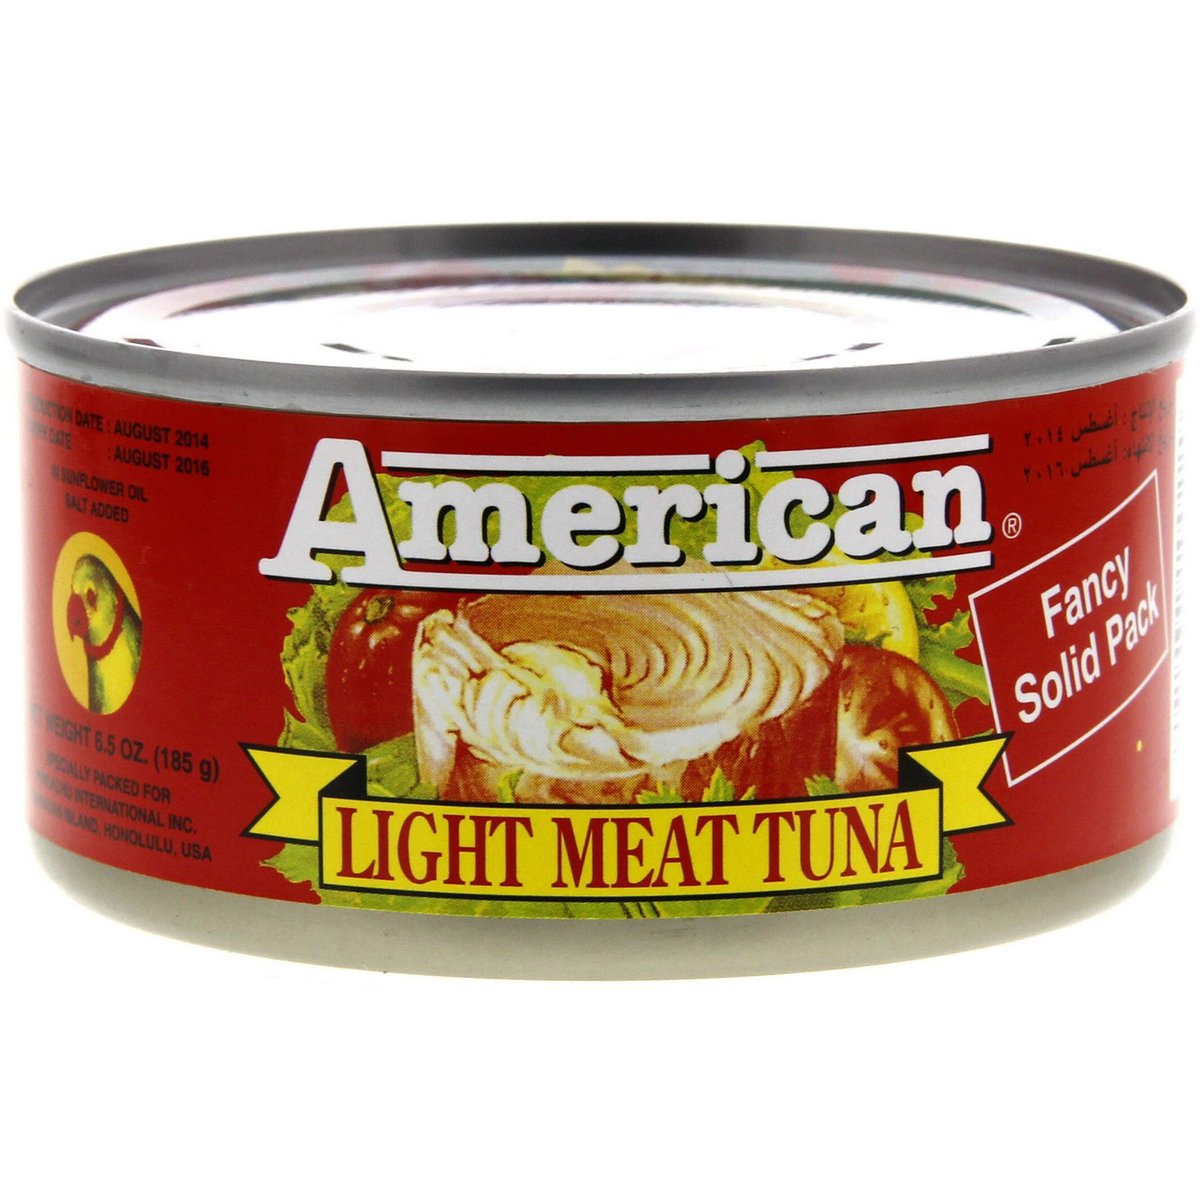 American Light Meat Tuna 185 g Online at Best Price, Canned Tuna